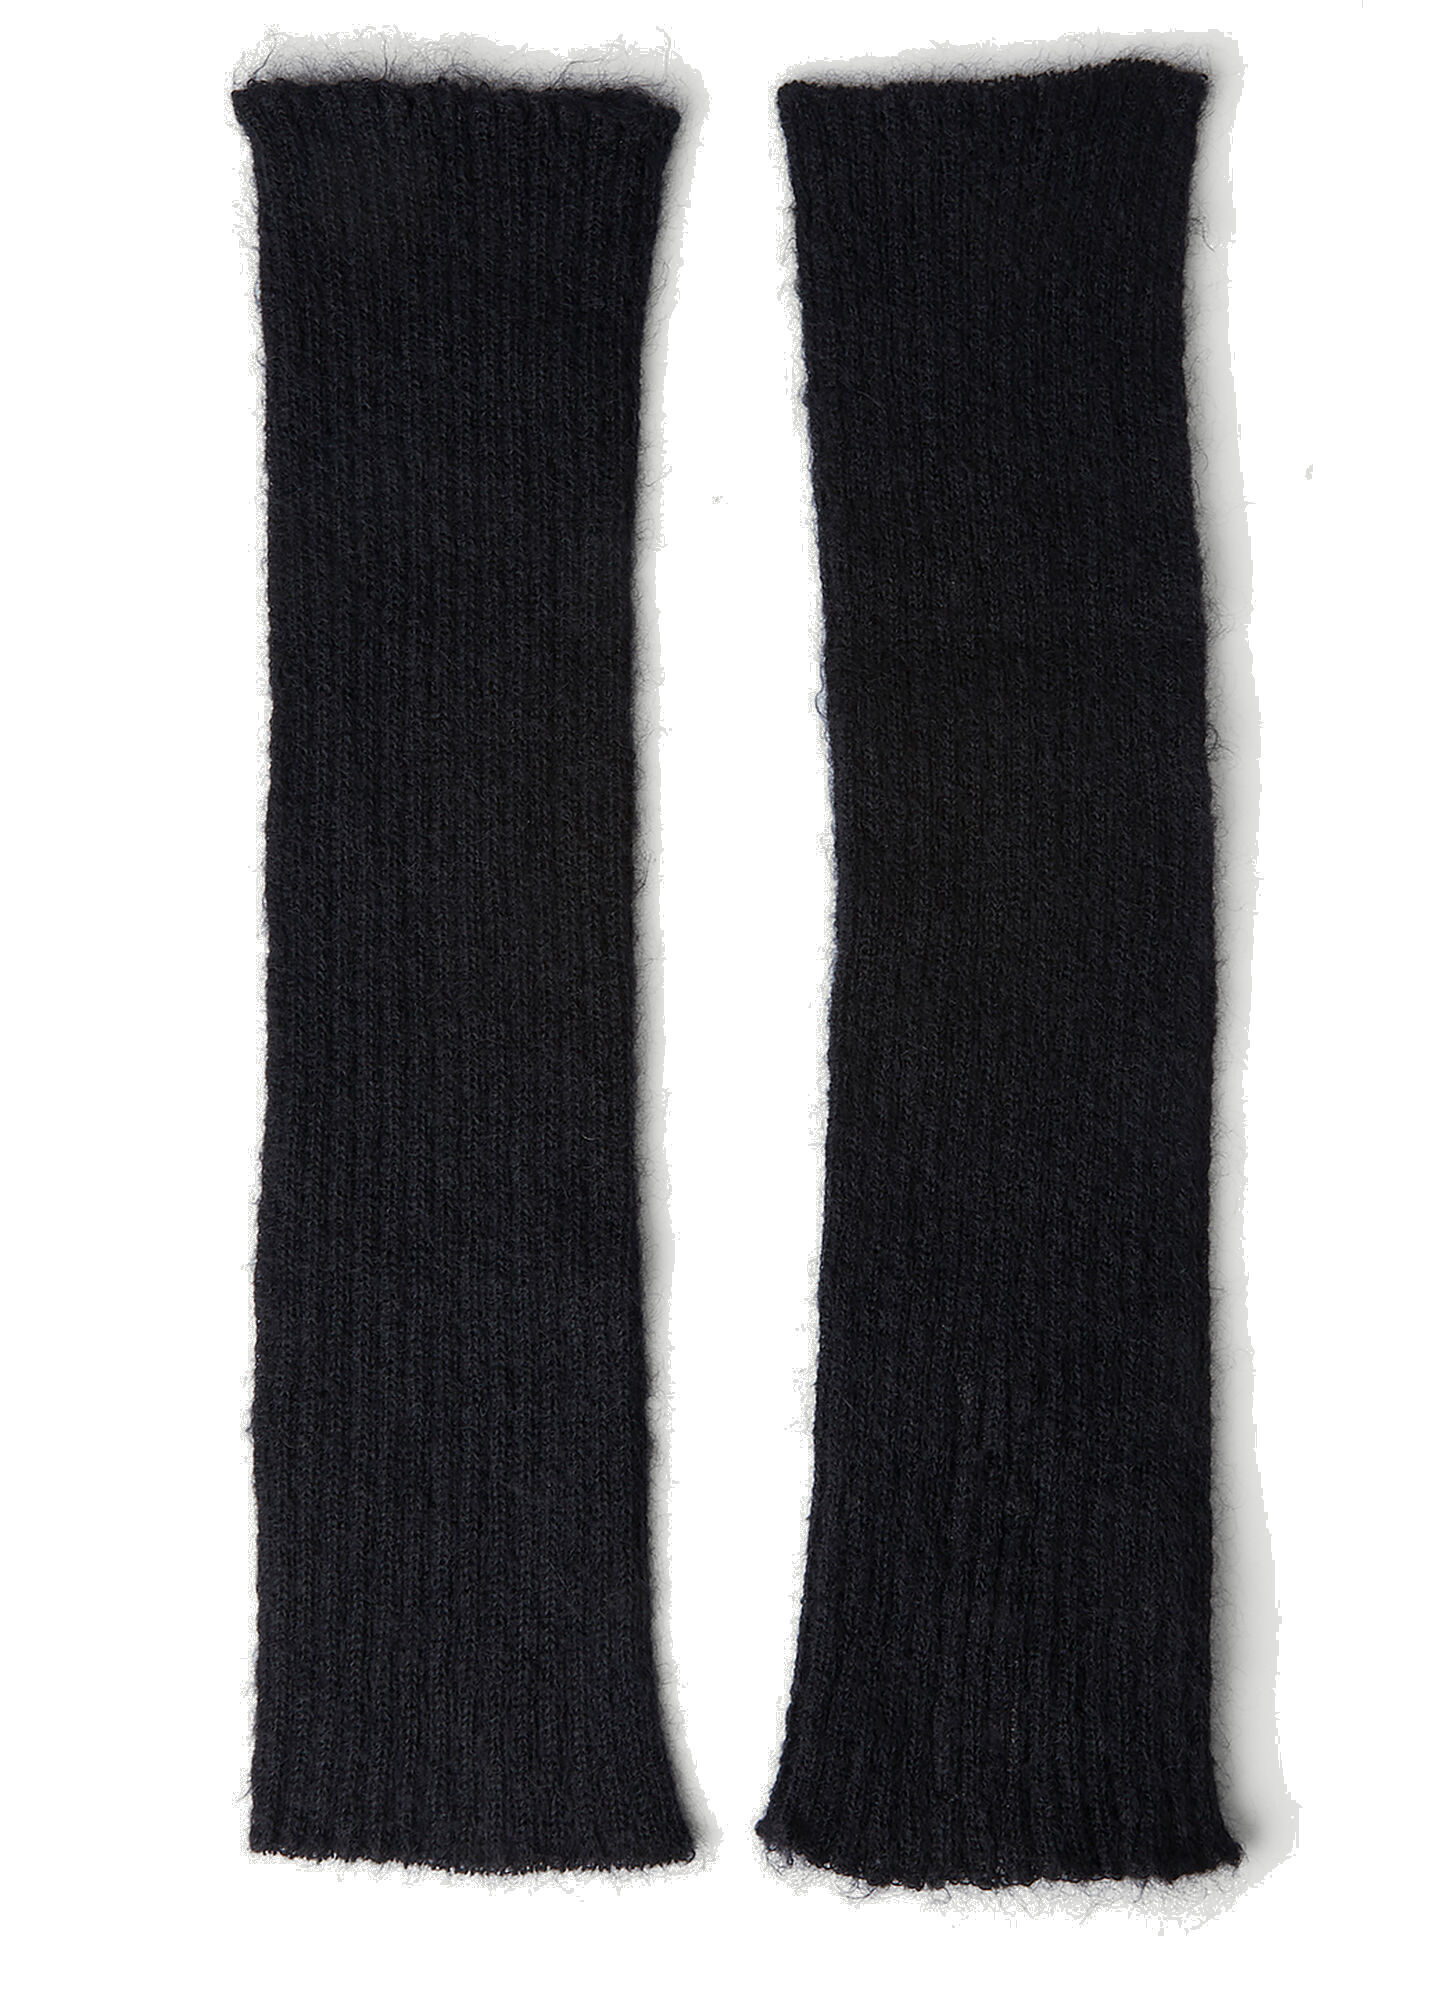 Photo: Ribbed Leg Warmers in Black